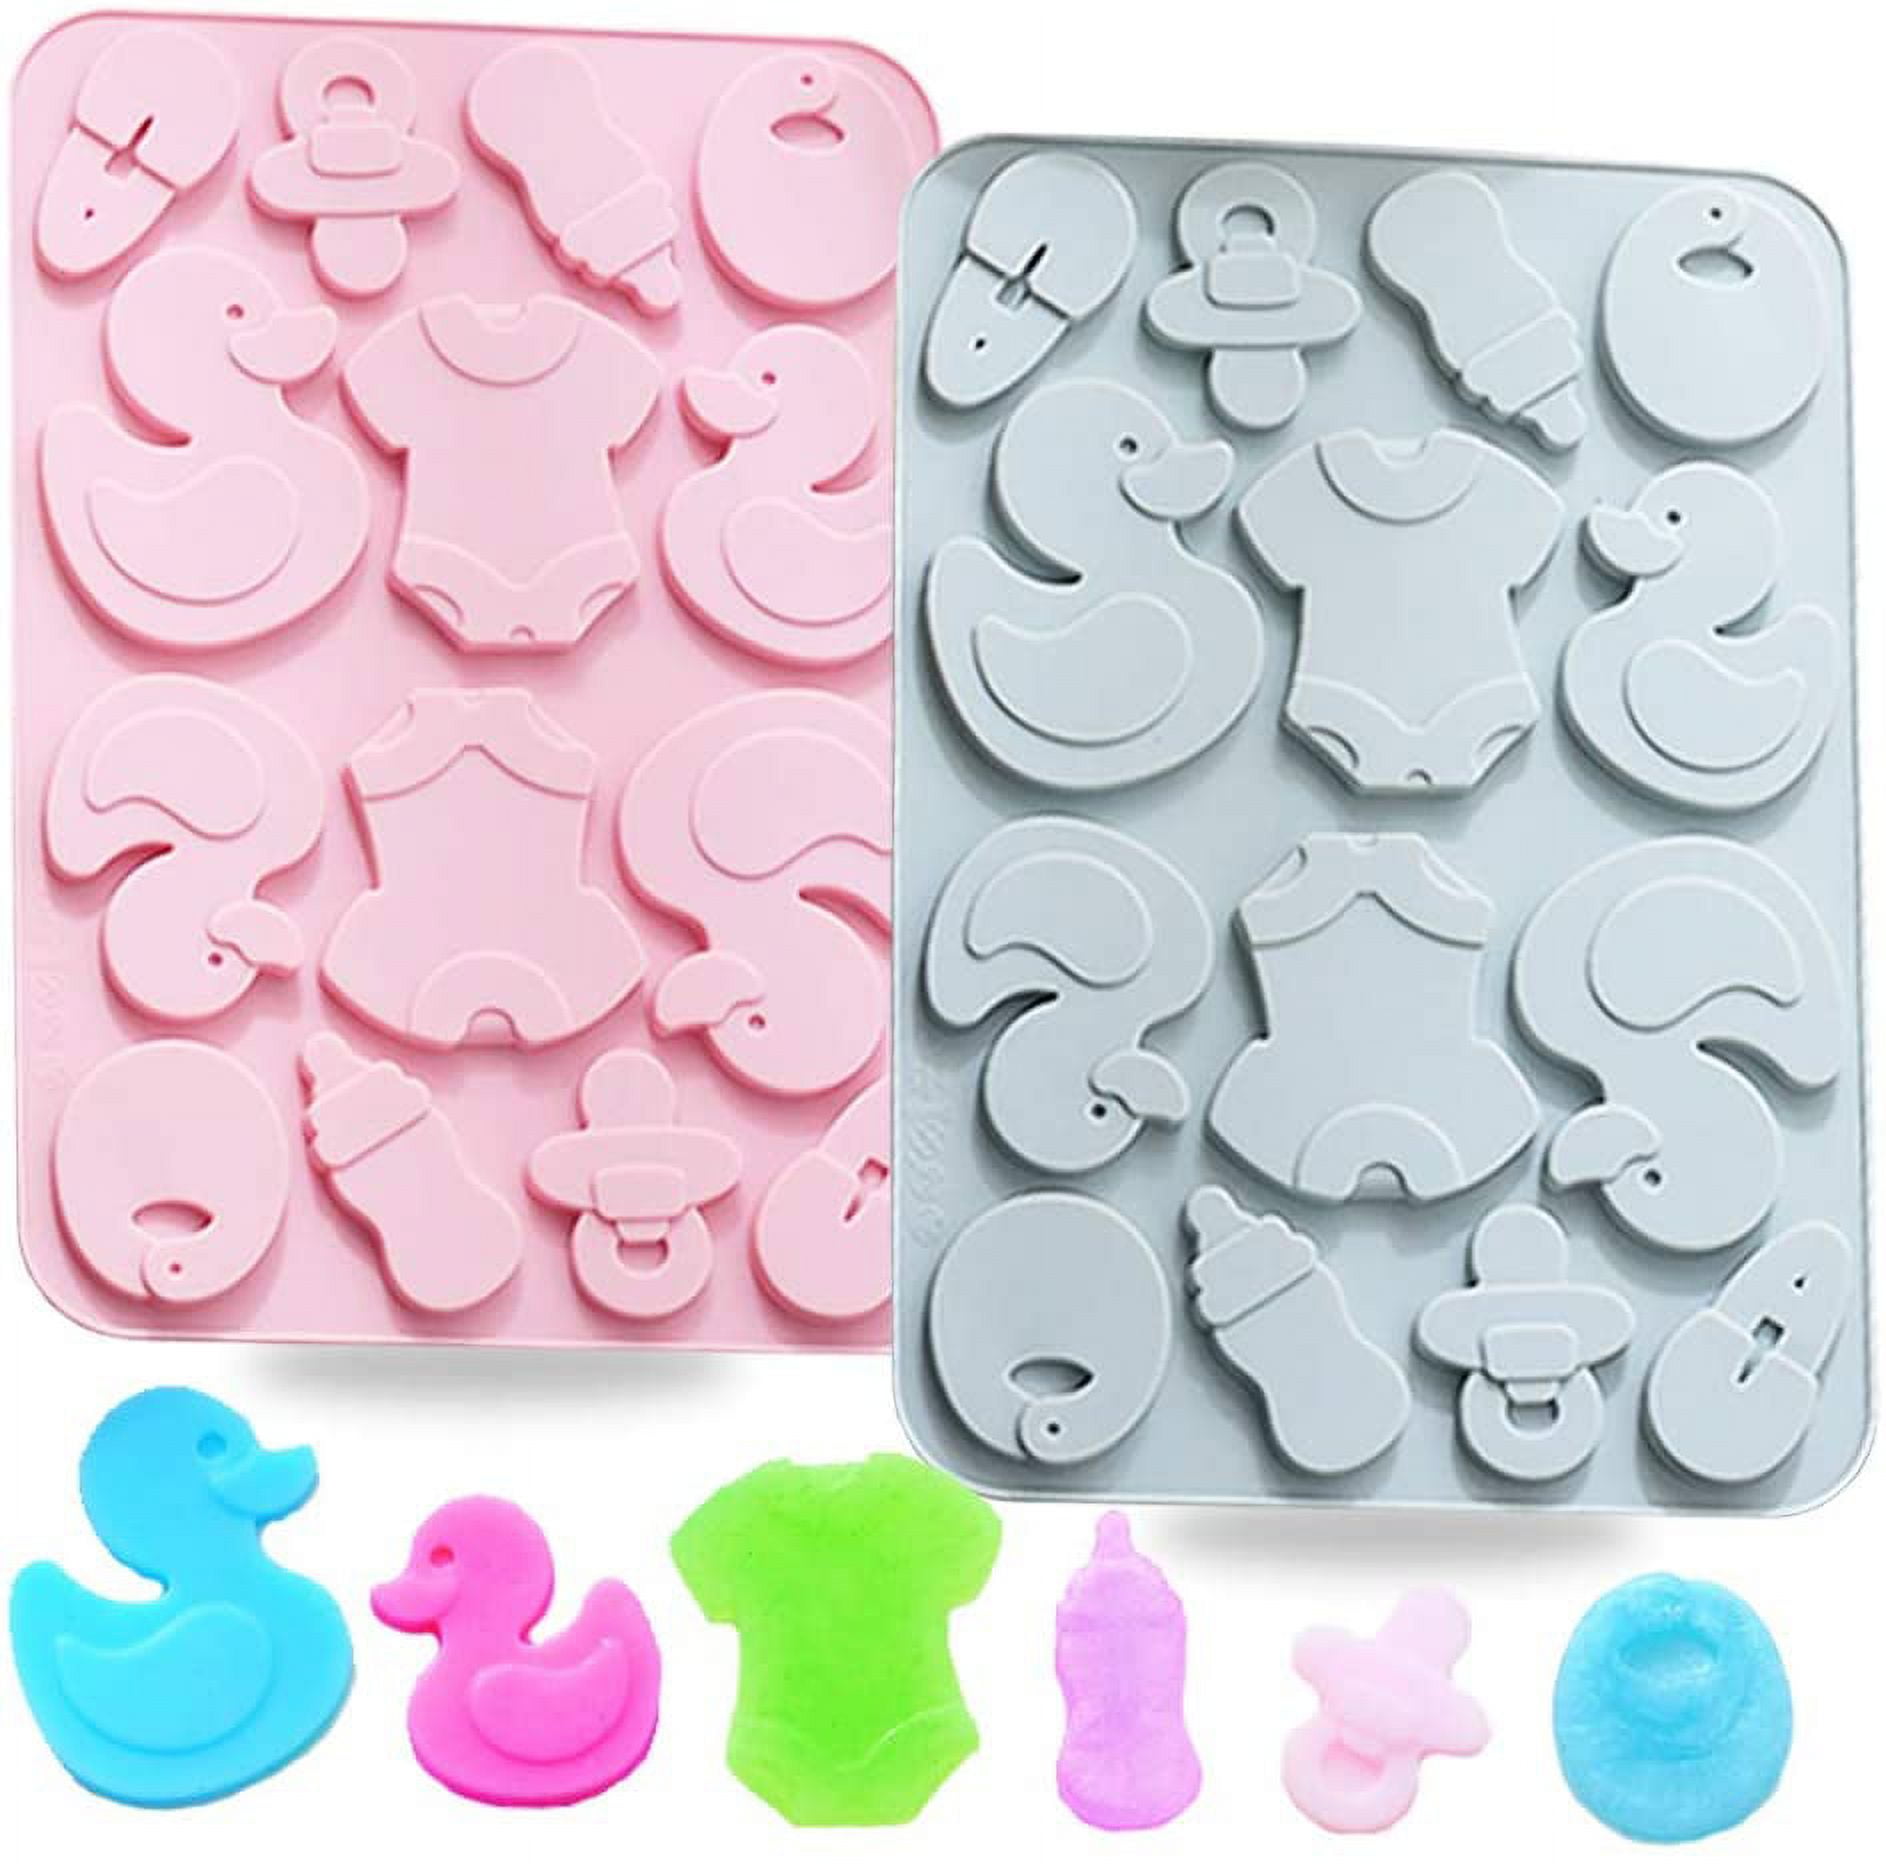  Mujiang Forest Animal Fondant Molds Cats Dogs Foxes Silicone  Molds Squirrel Hedgehog Owl Bird Candy Mold For Cake Decoration Cupcake  Topper Sugar Resin Chocolate Gum Paste Set Of 4 : Home